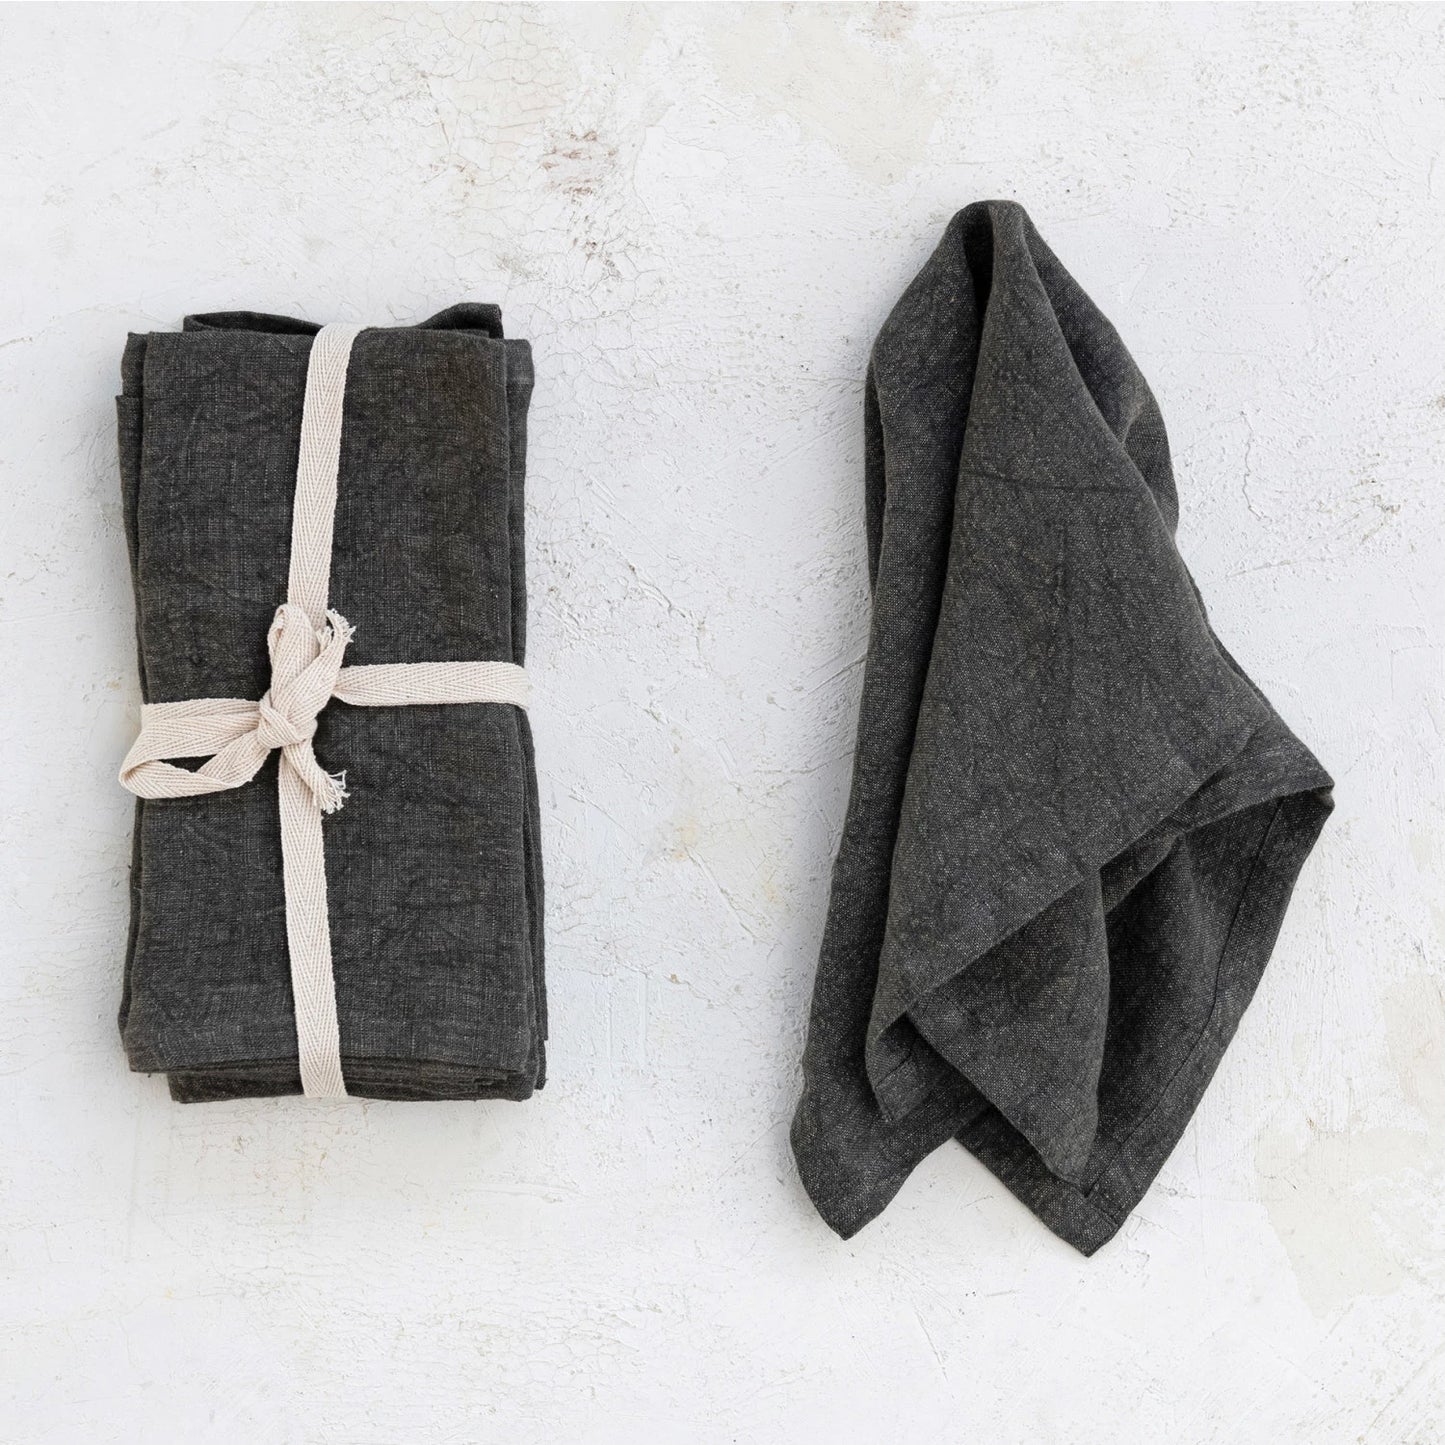 set of charcoal napkins tied together with a ribbon and one napkin draped next to it on a plaster background.